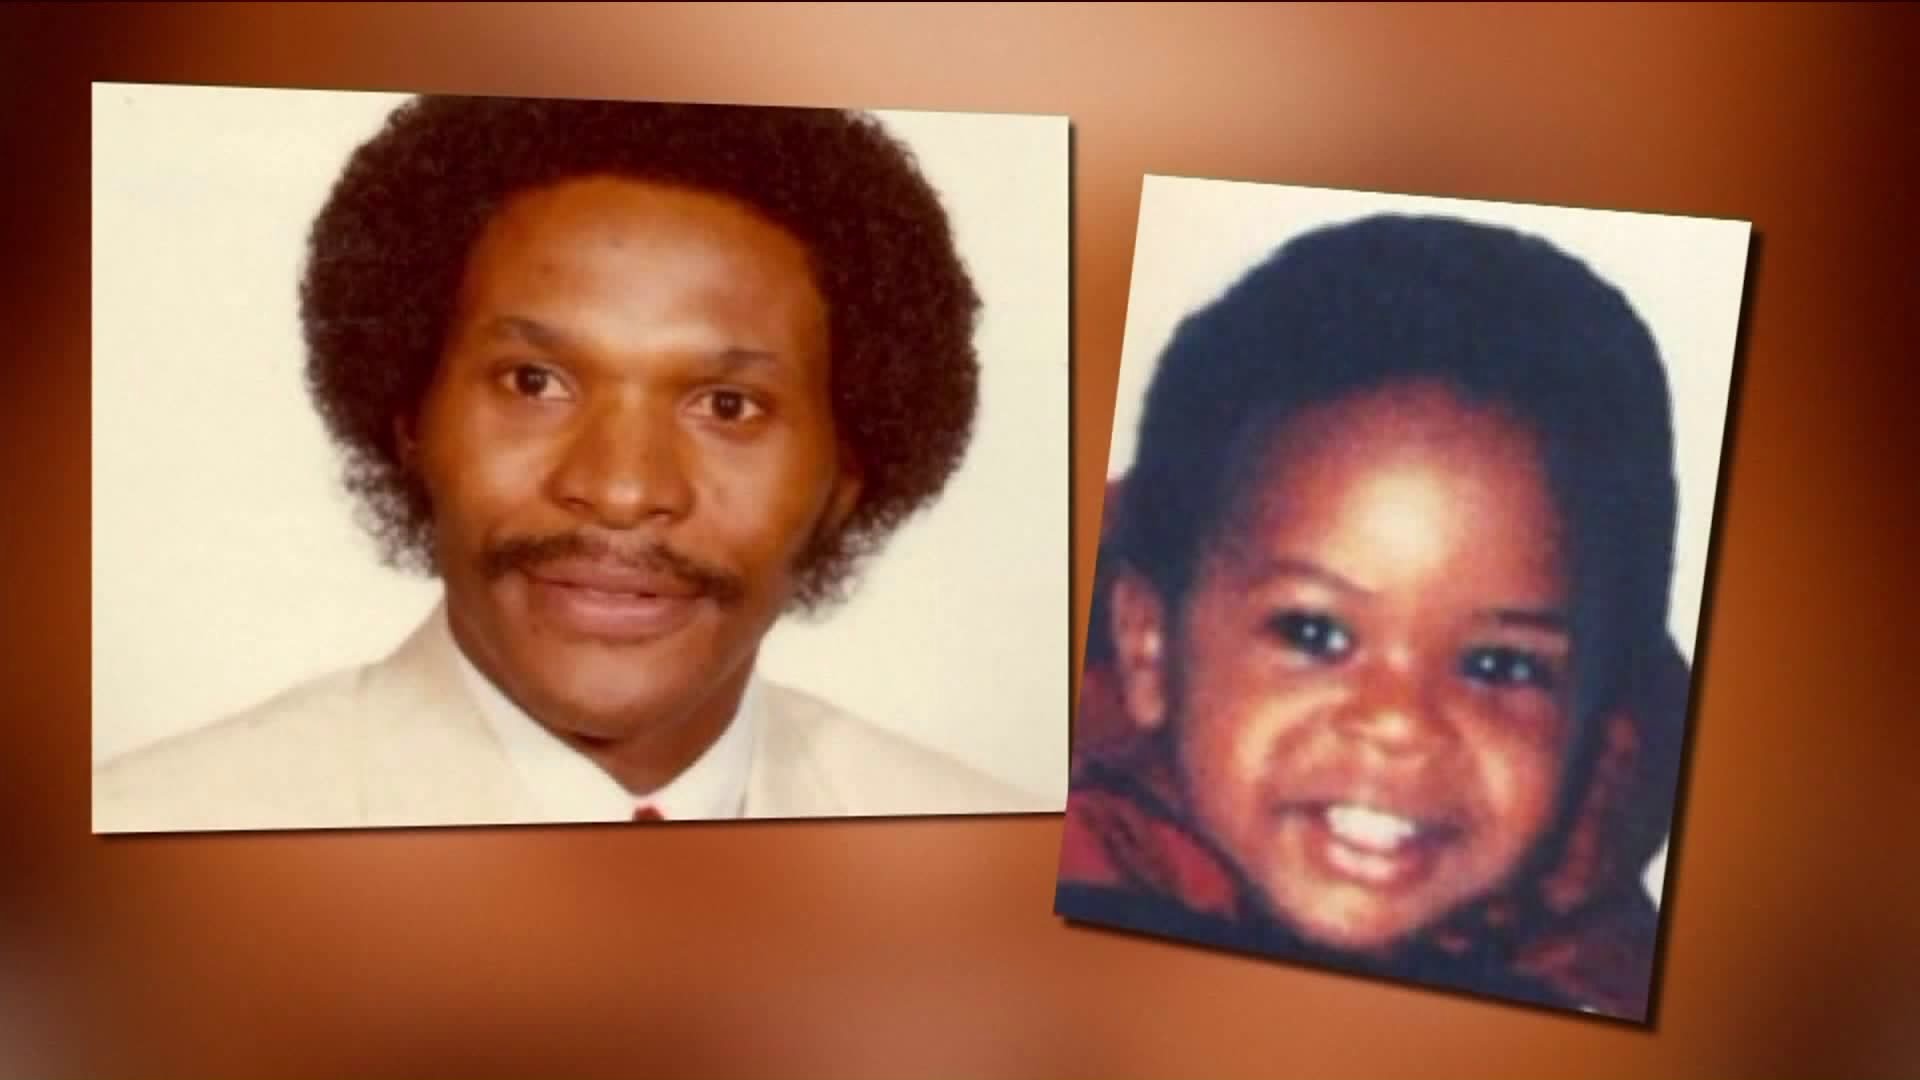 Man who kidnapped son in 1987 arrested in Vernon: Feds